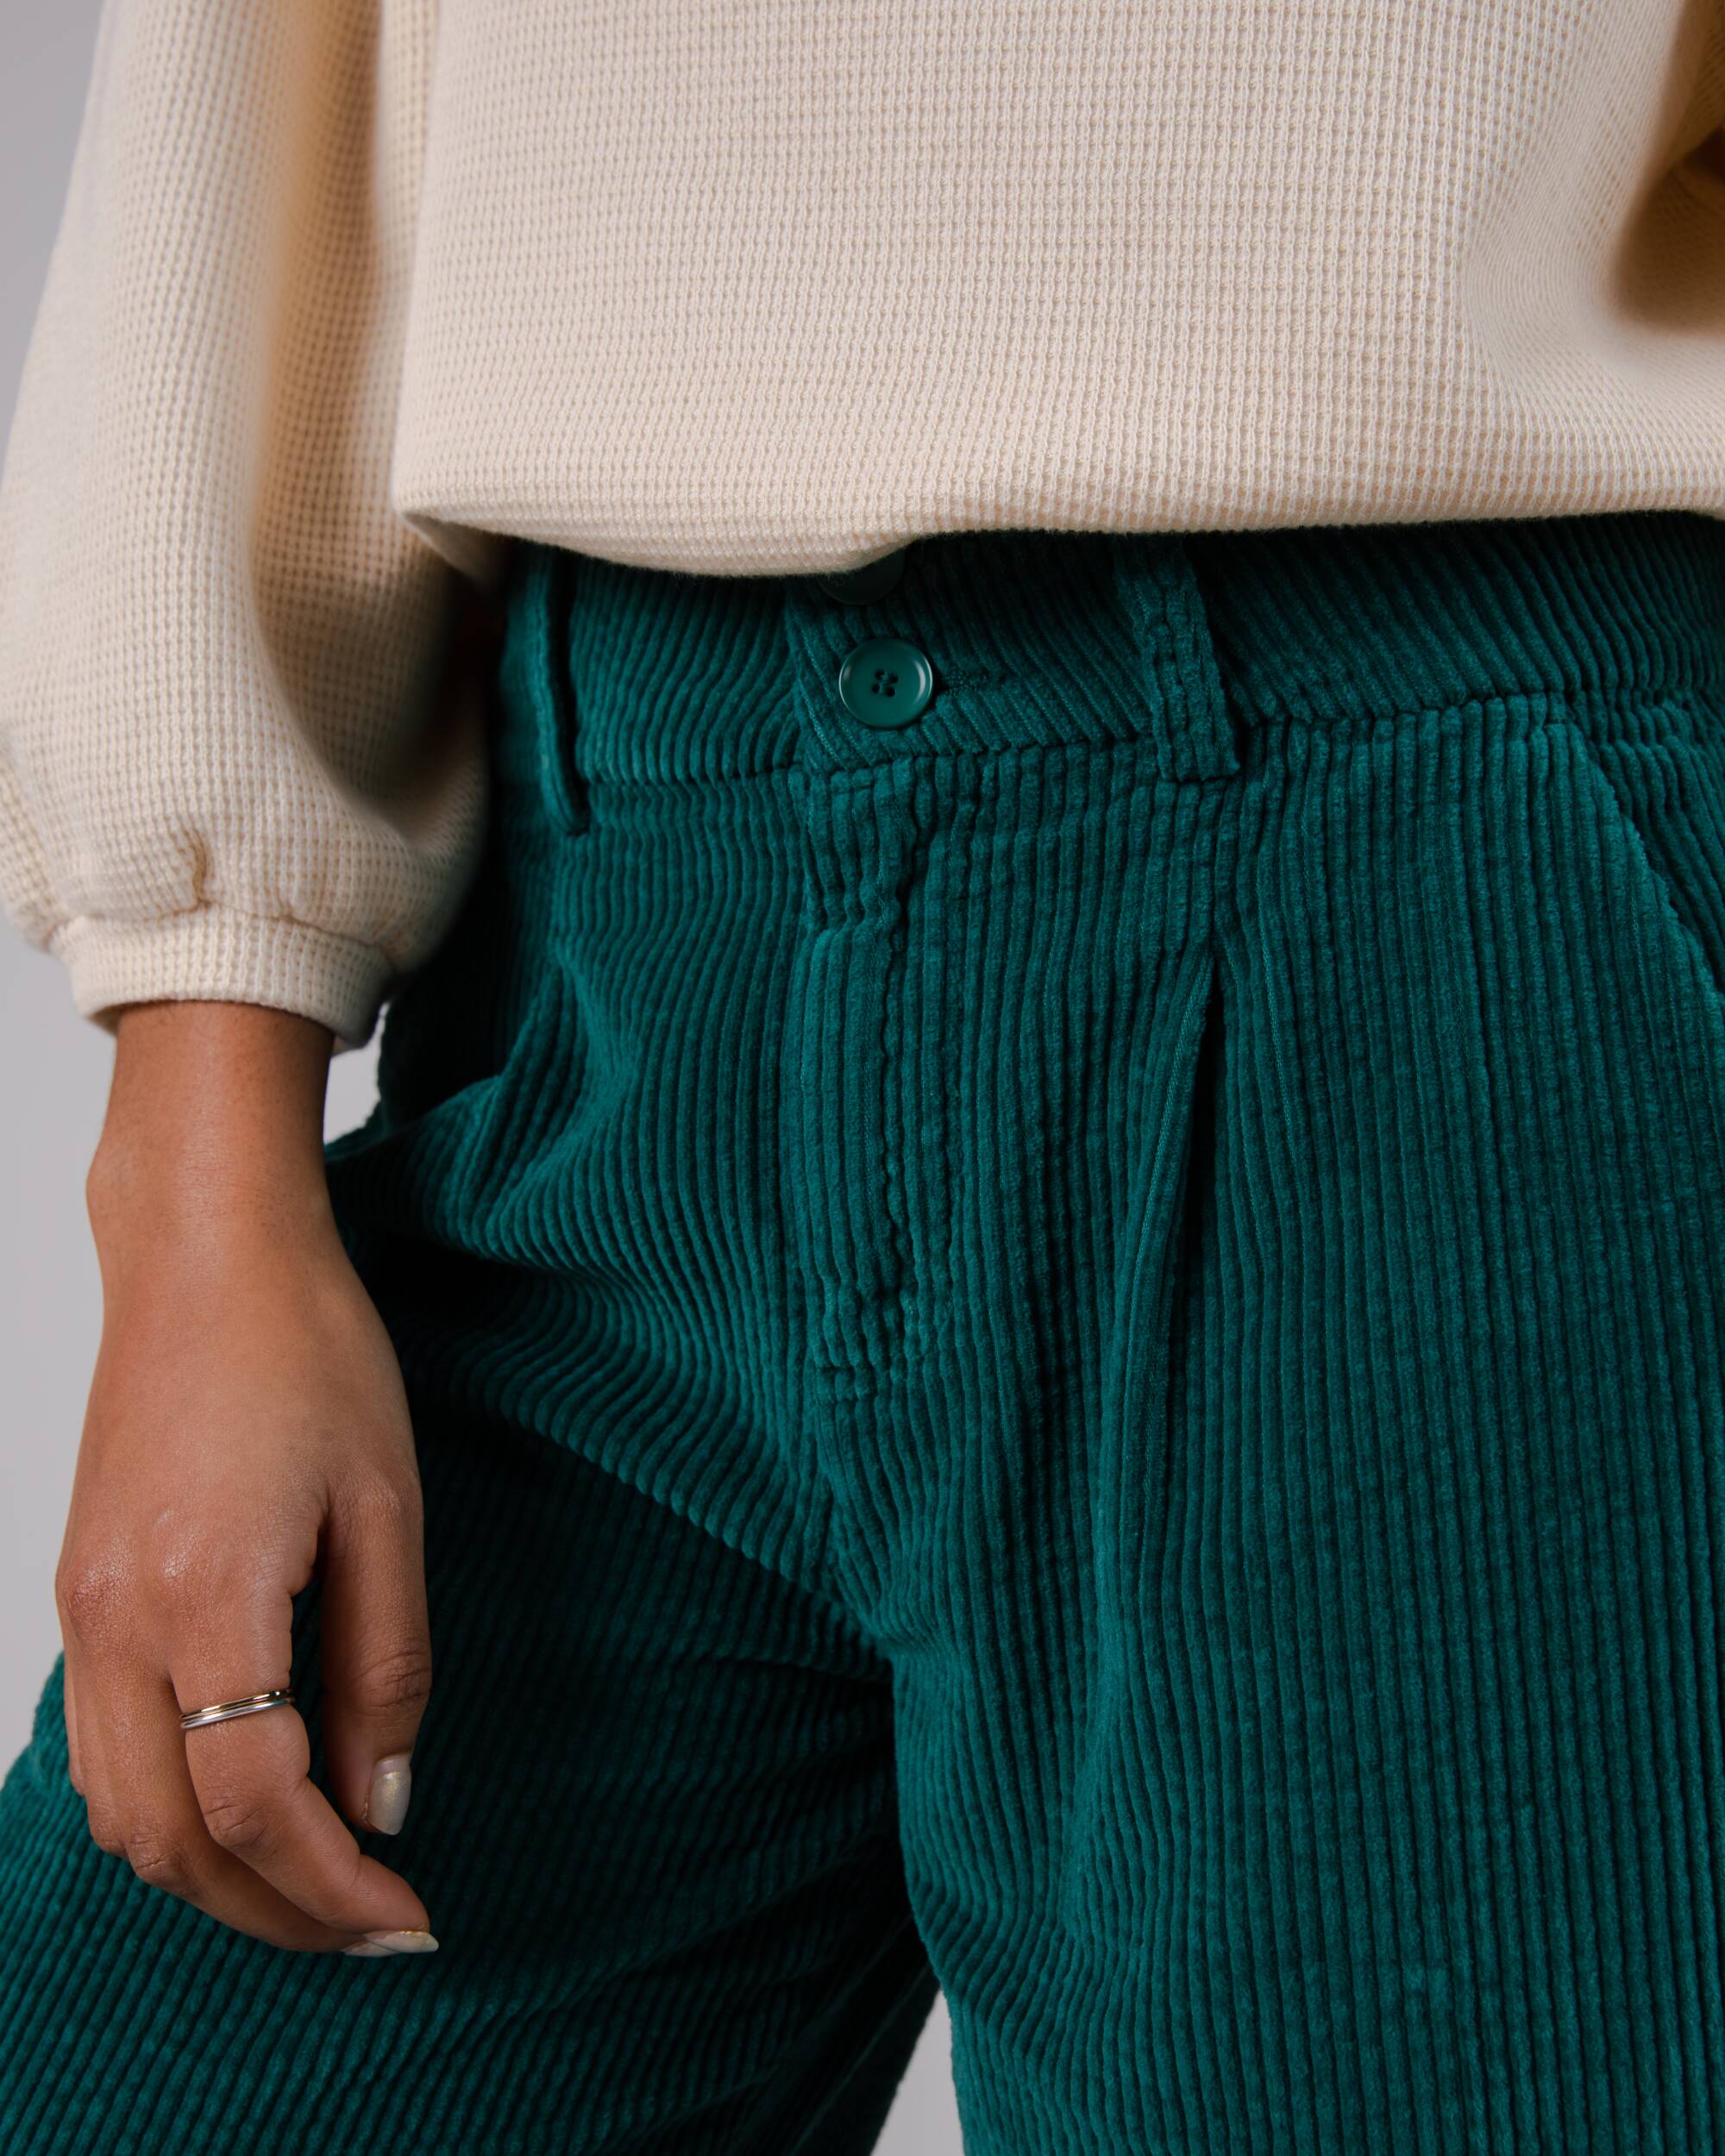 Corduroy pleated trousers in green made from organic cotton by Brava Fabrics